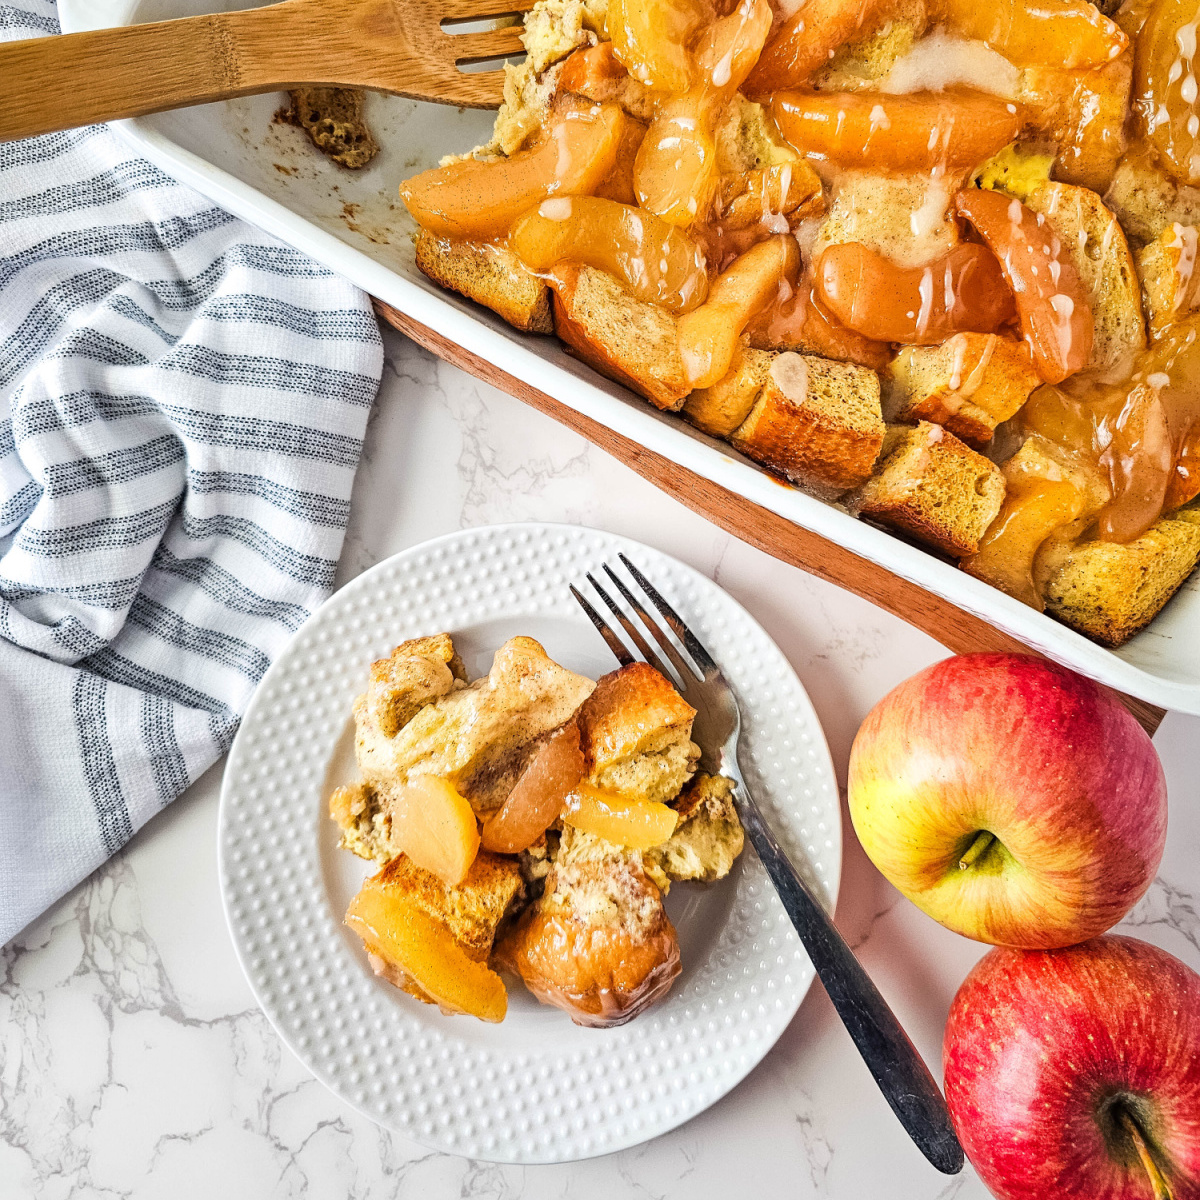 This crowd-pleasing Simple French Toast Casserole with Apples is easy to make and is perfect for a cozy breakfast or brunch. #brunchweek #frenchtoast #casserole #apples blogghetti.com/simple-french-…